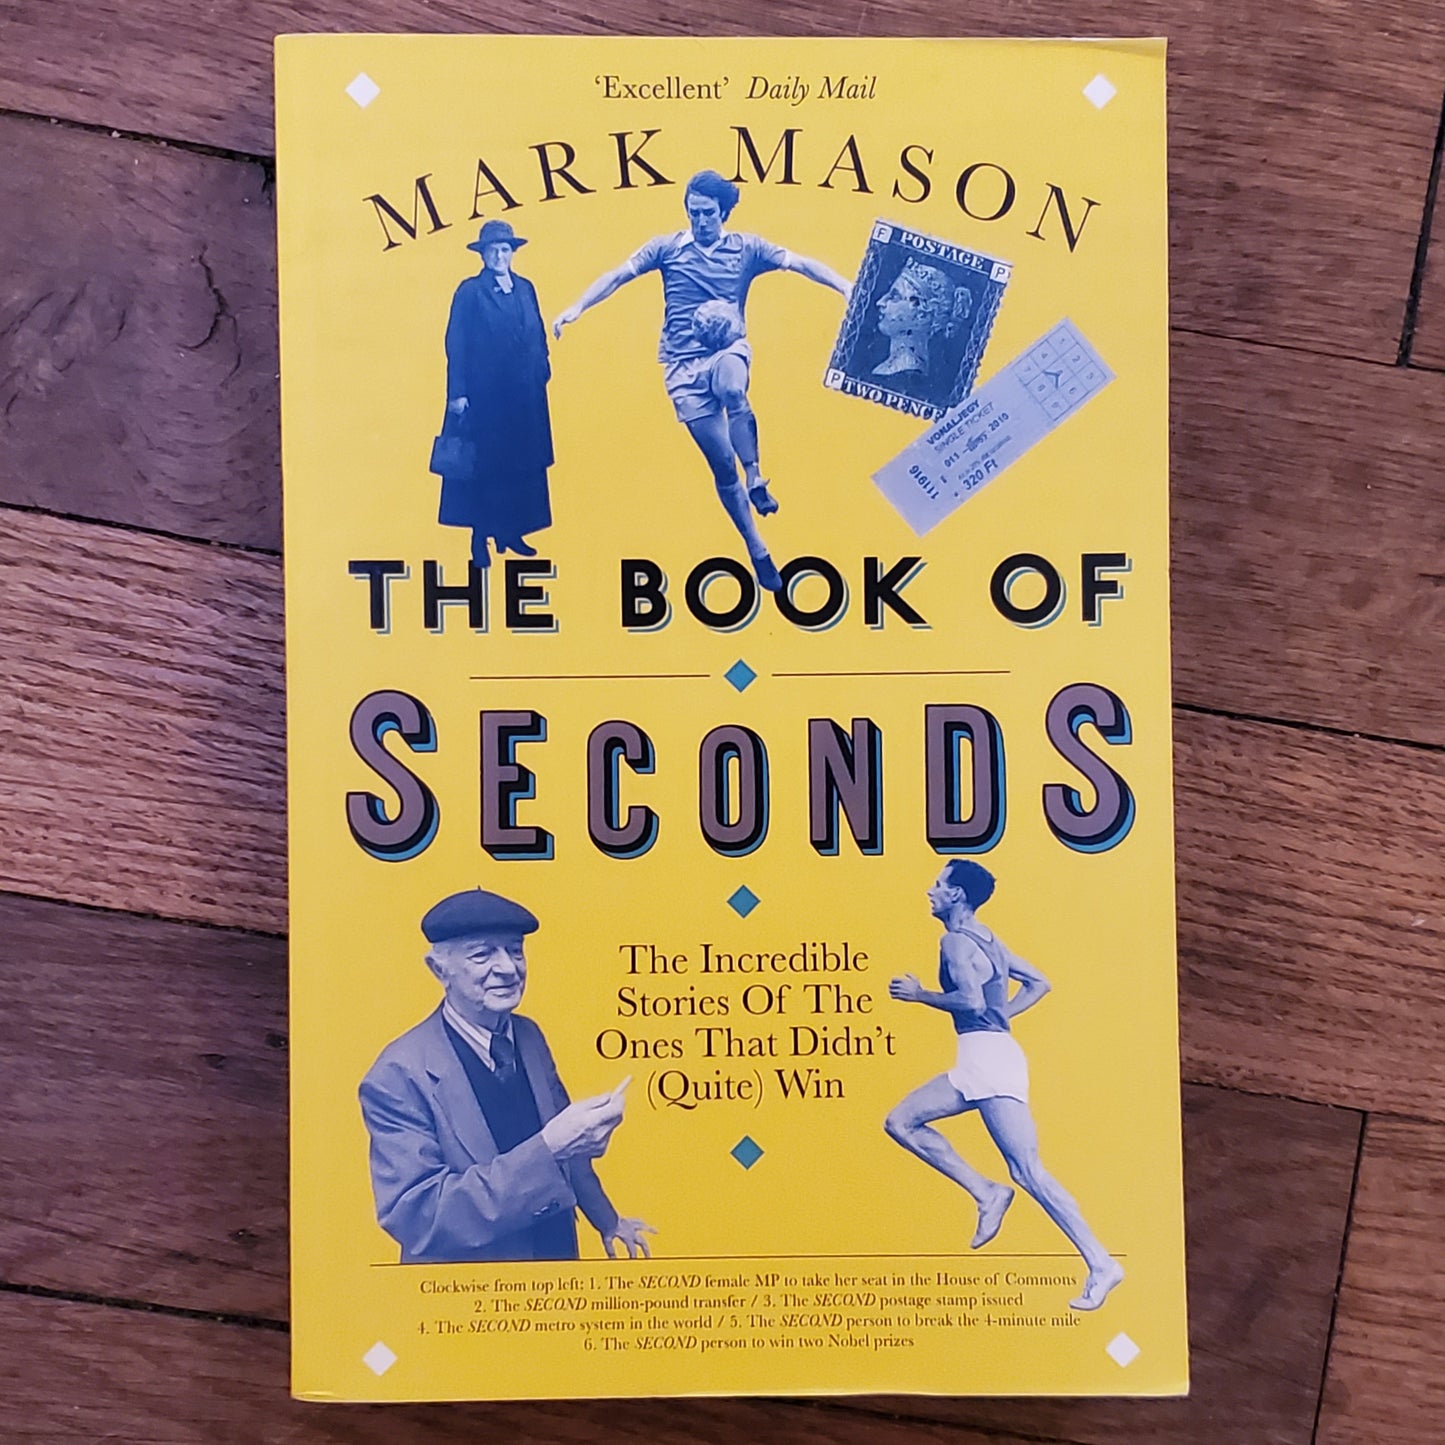 The Book of Seconds: Incredible Stories of the Ones that Didn't (Quite) Win